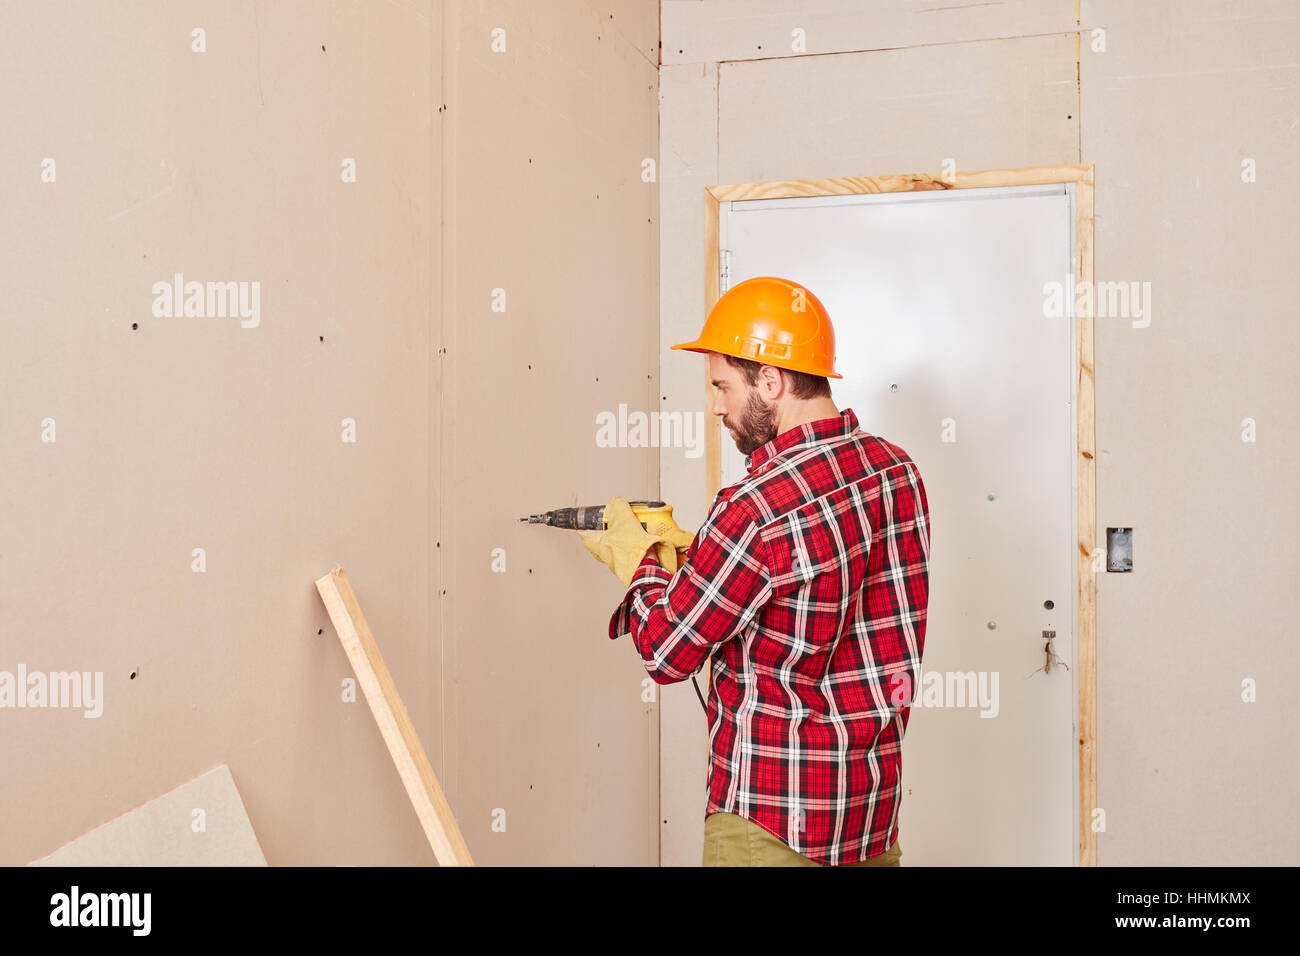 Carpenter working with drilling machine and cladding wall Stock Photo